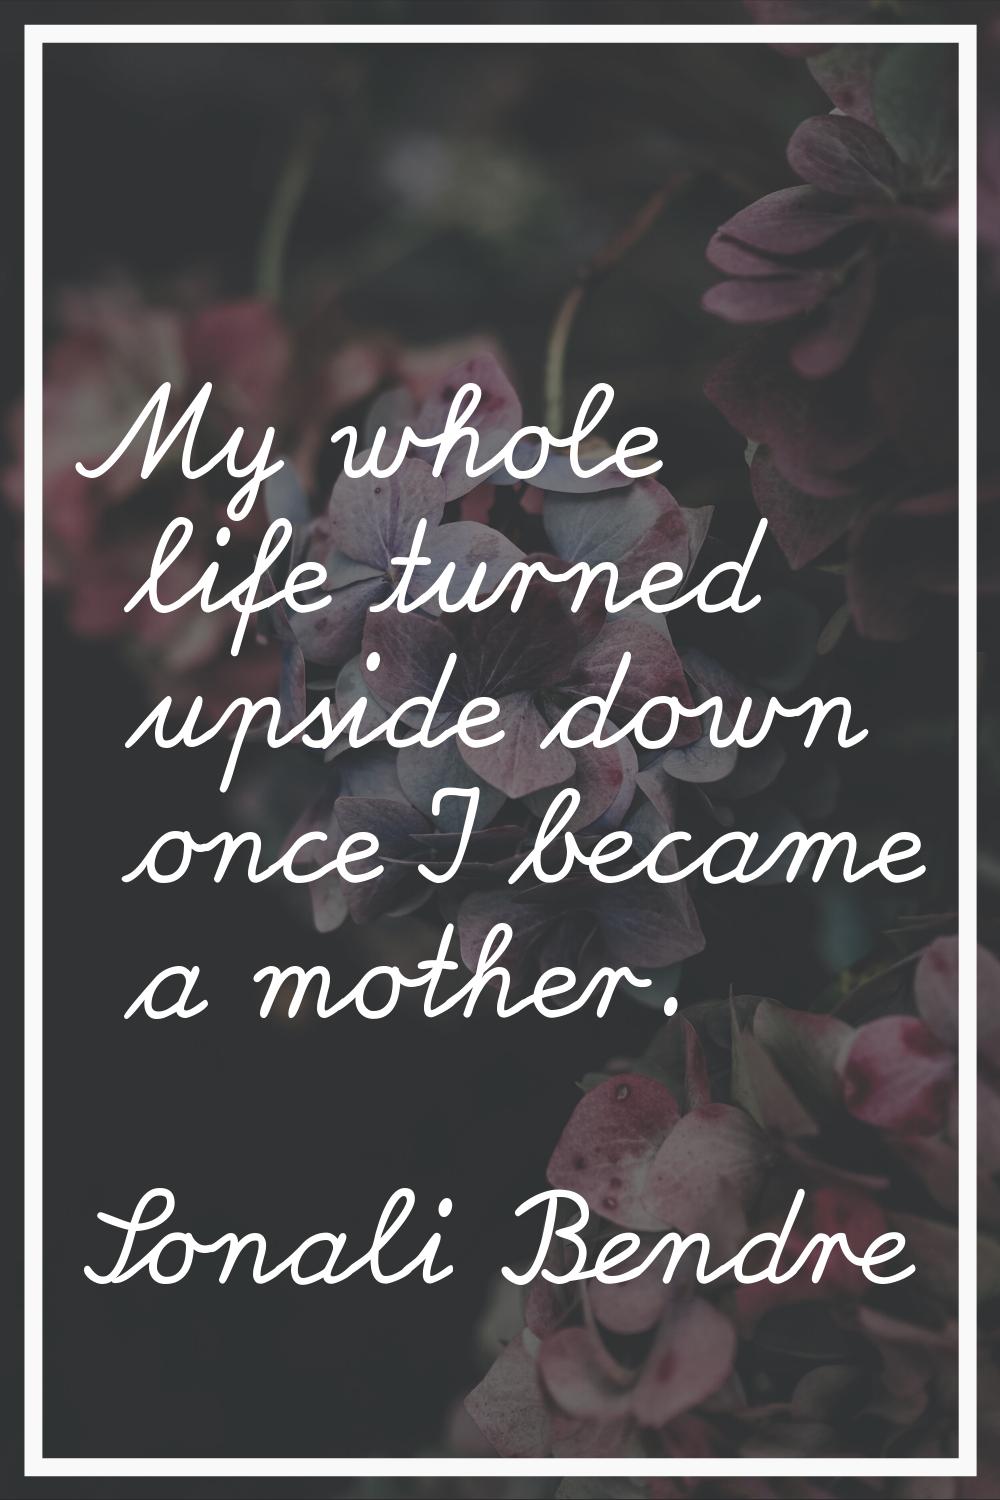 My whole life turned upside down once I became a mother.